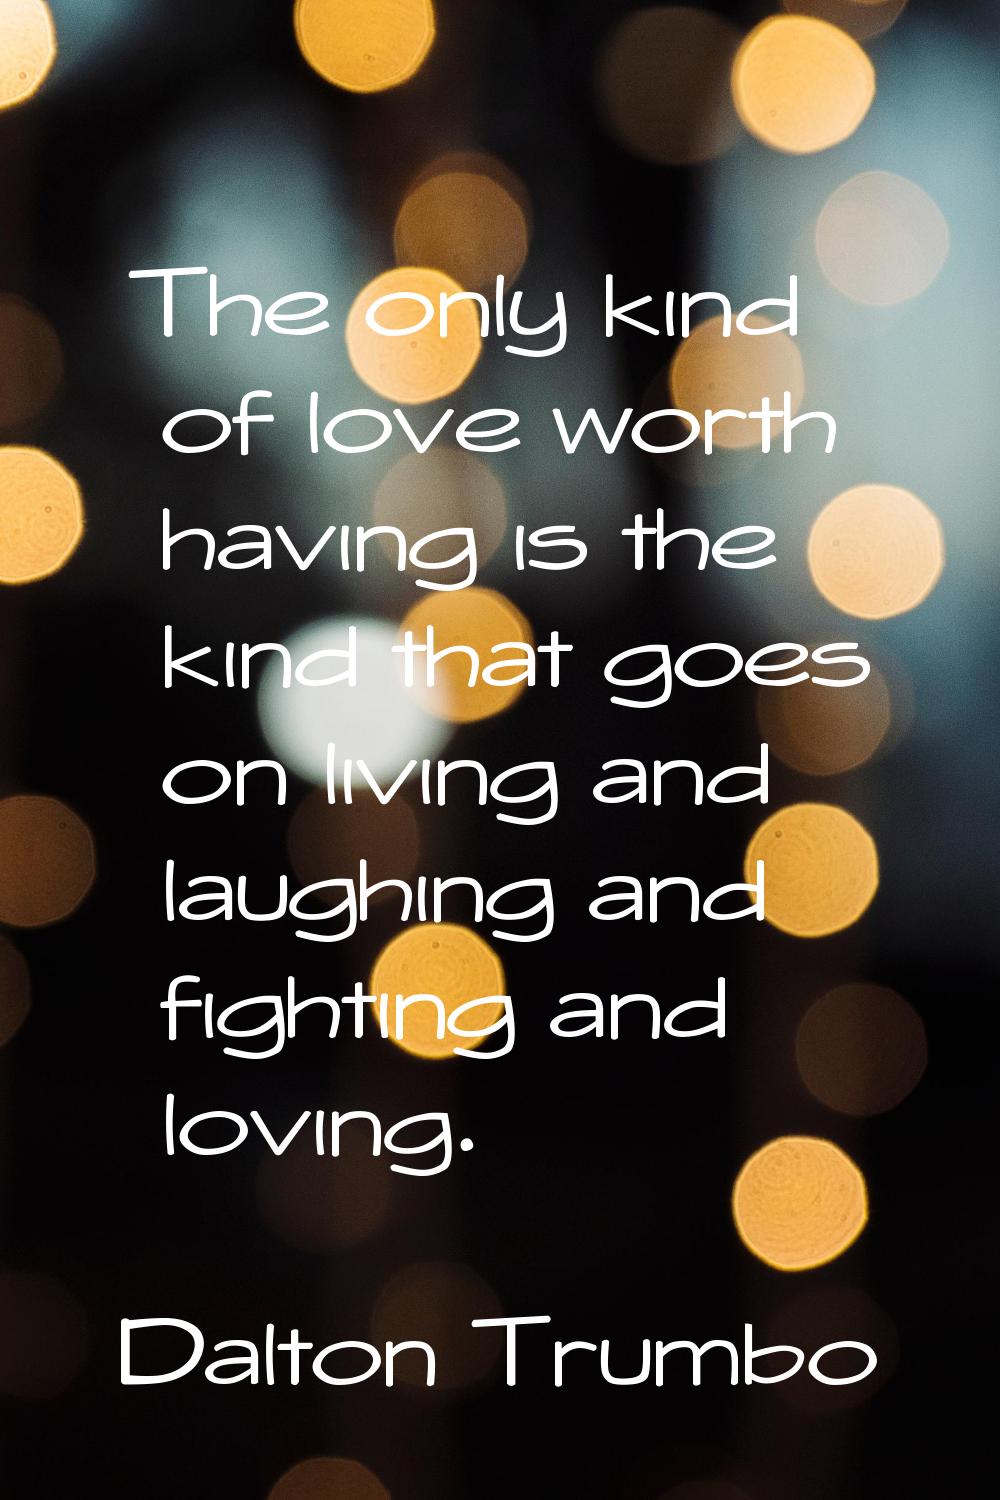 The only kind of love worth having is the kind that goes on living and laughing and fighting and lo